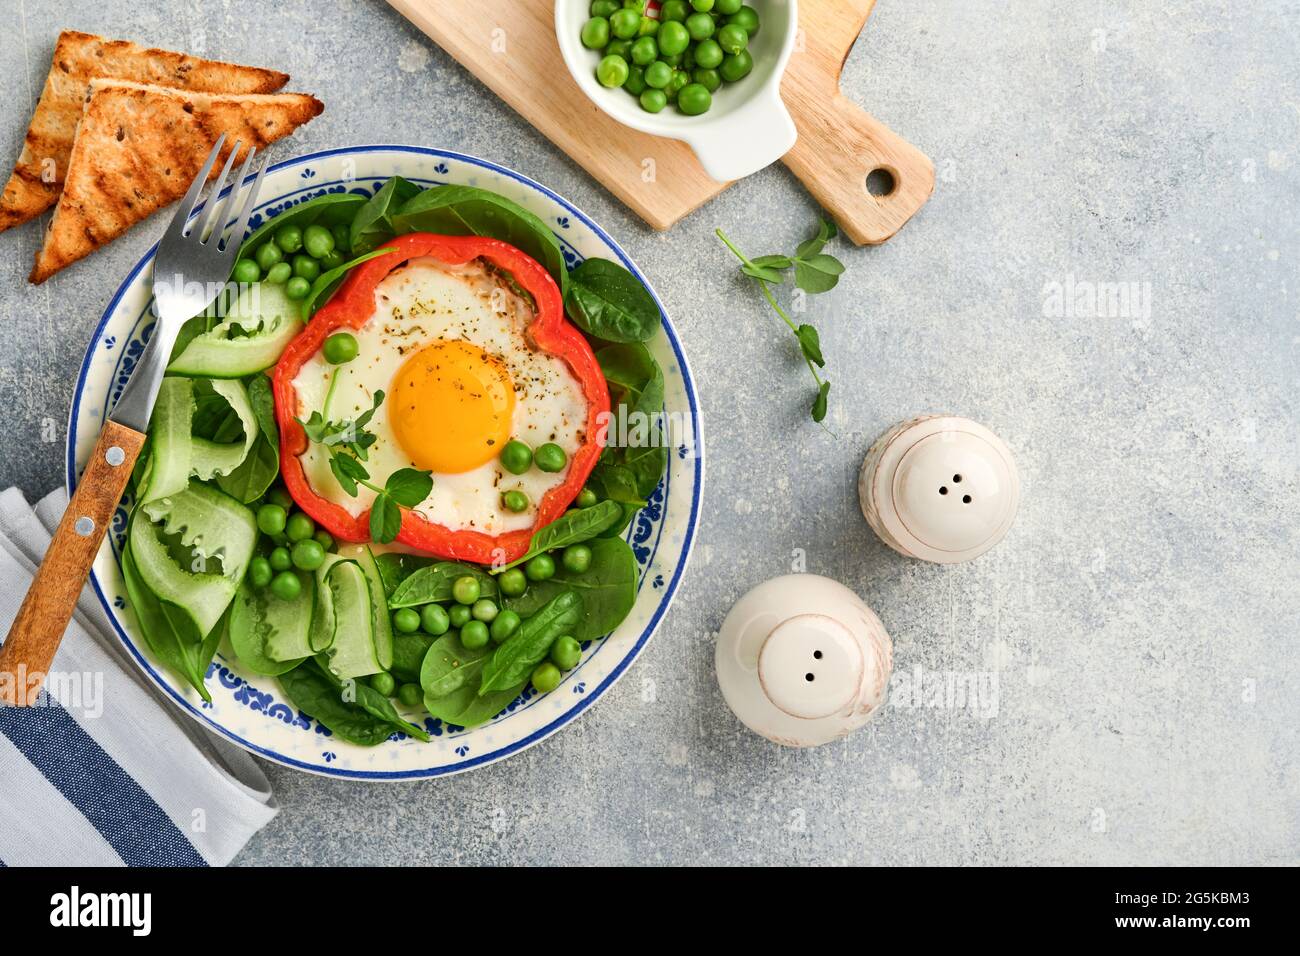 Red bell peppers stuffed with eggs, spinach leaves, green peas and microgreens on a breakfast plate on light grey table background. Top view. Stock Photo